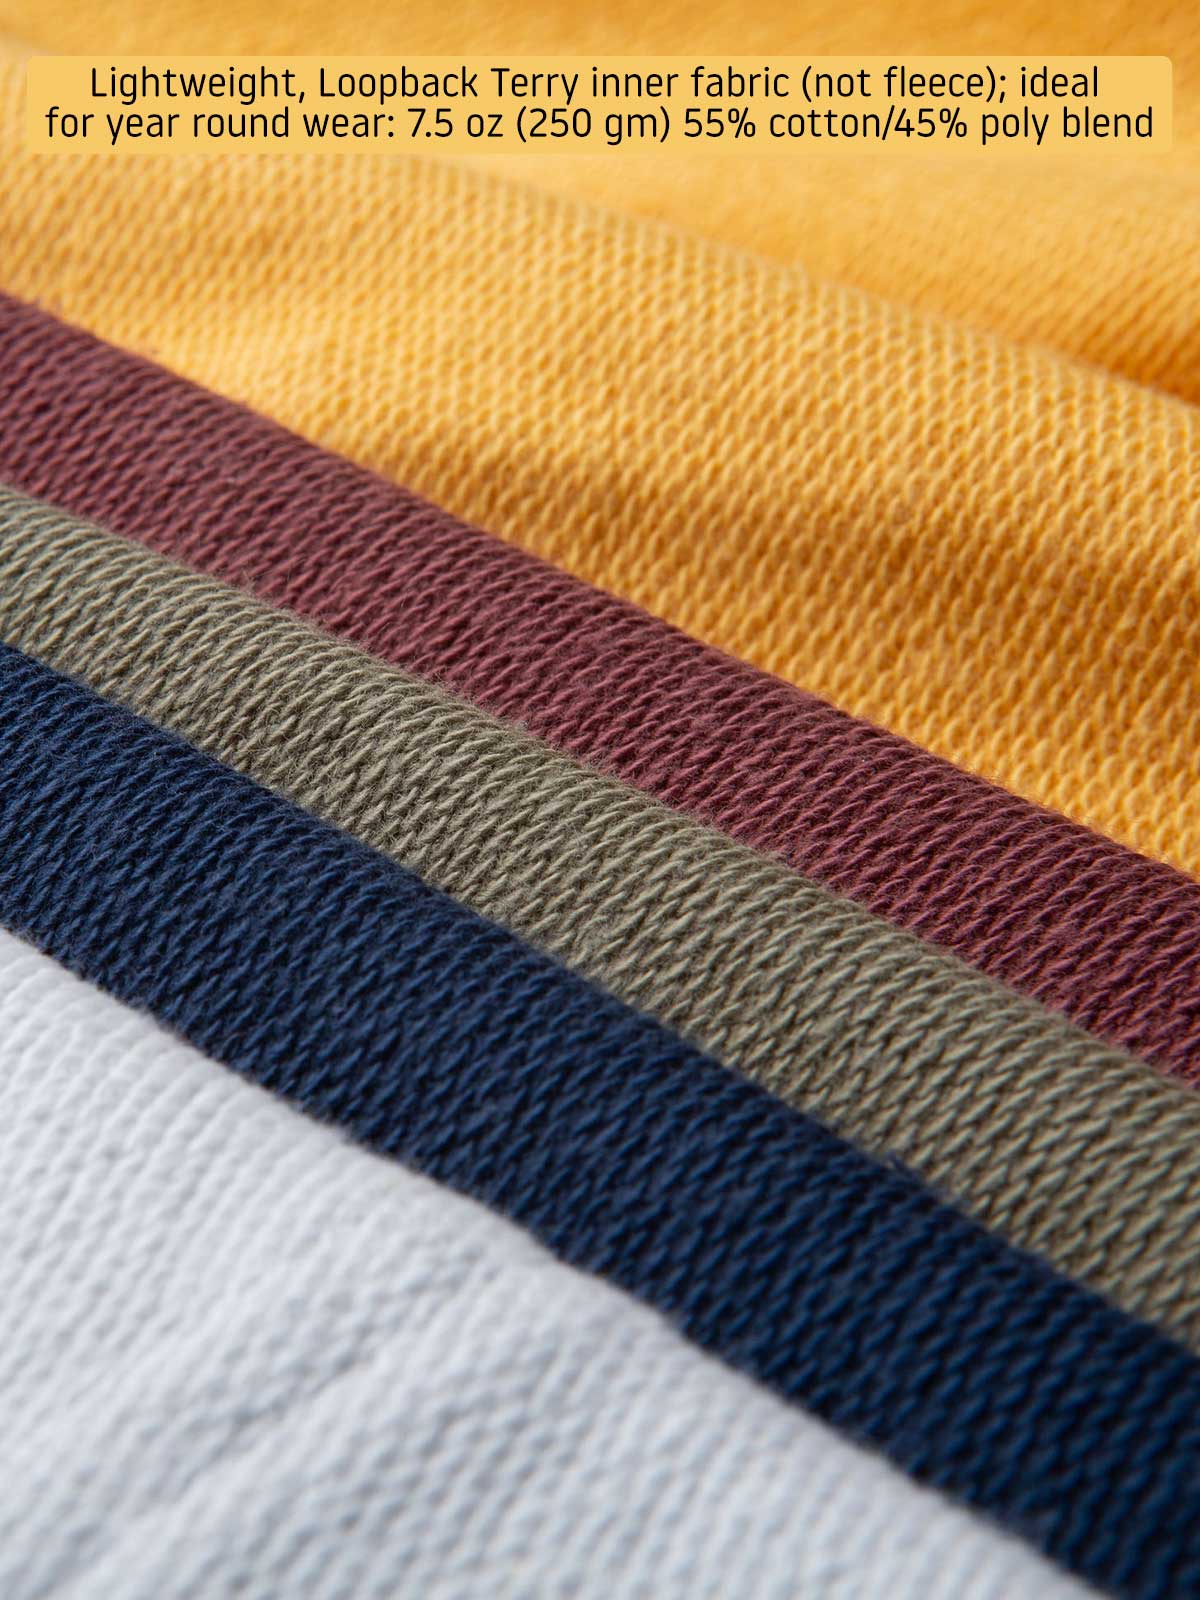 a close up of a blanket with different colors